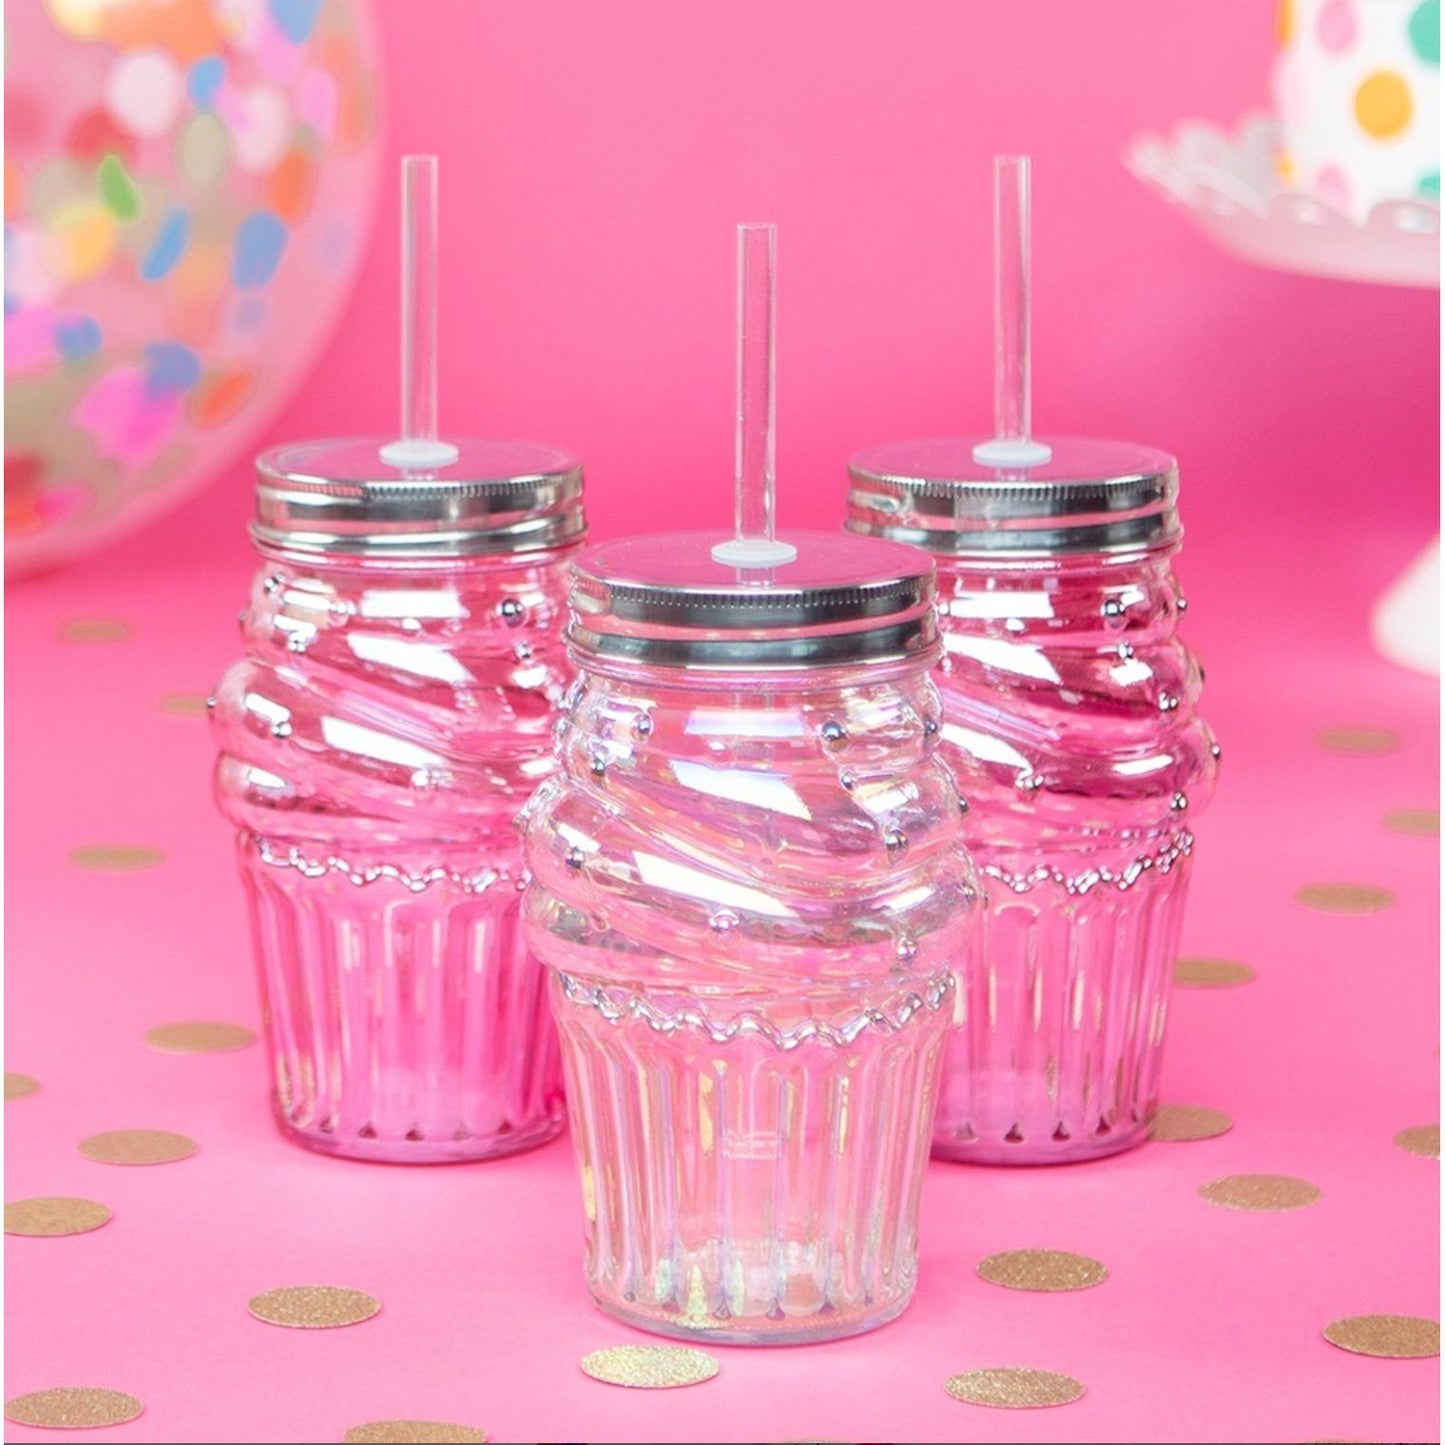 Set of 6 Glass Cupcake Sippers in Light Pink | Cute Wine or Cocktail Glass with Straw